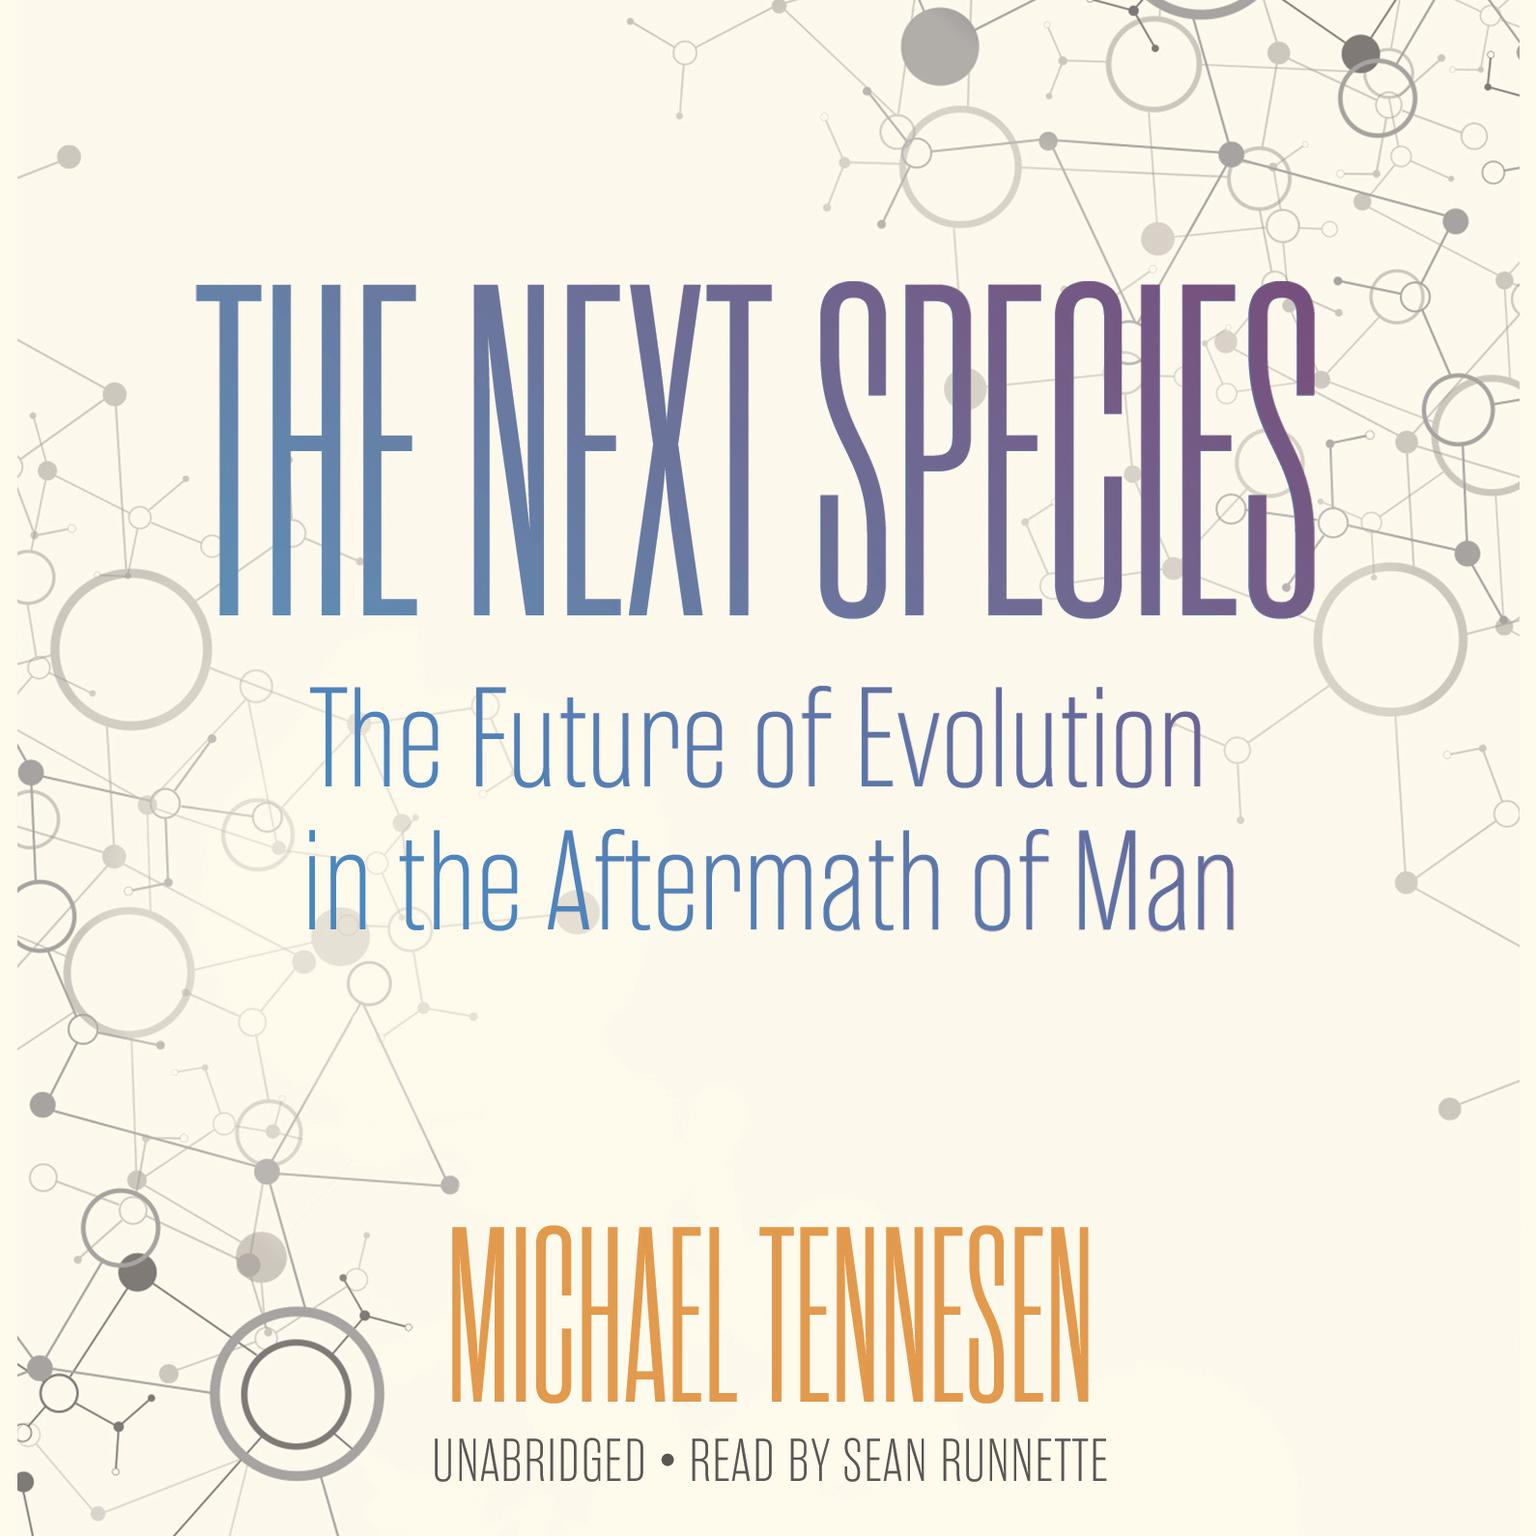 The Next Species: The Future of Evolution in the Aftermath of Man Audiobook, by Michael Tennesen